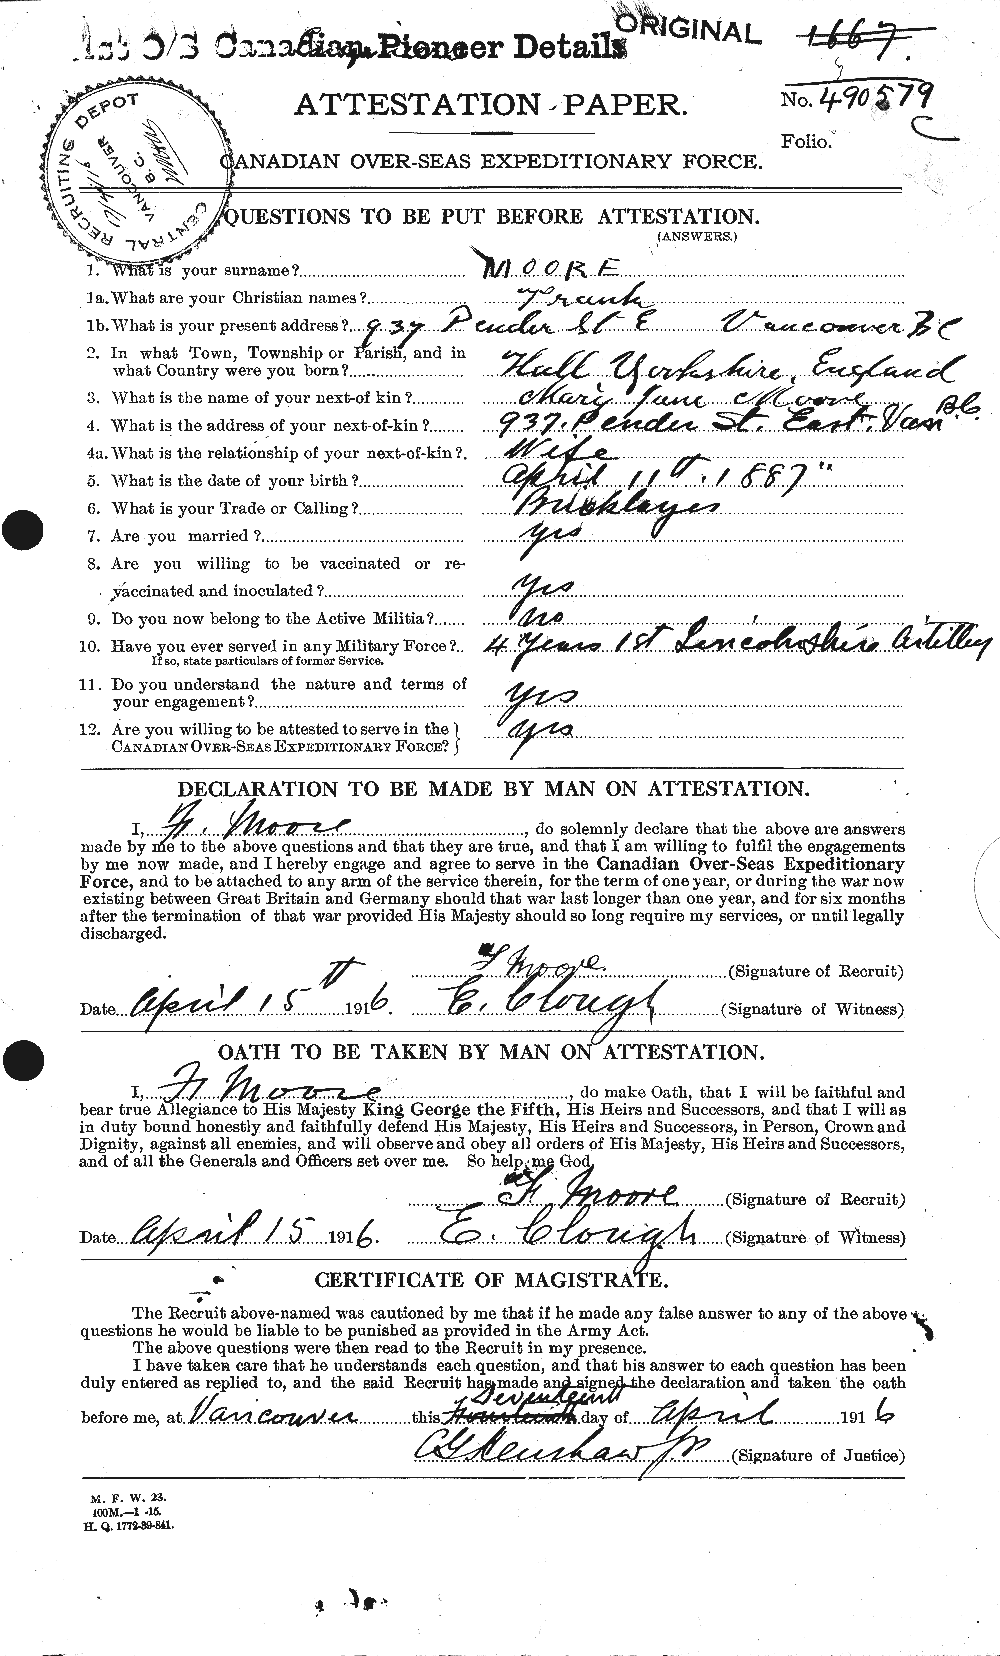 Personnel Records of the First World War - CEF 506694a